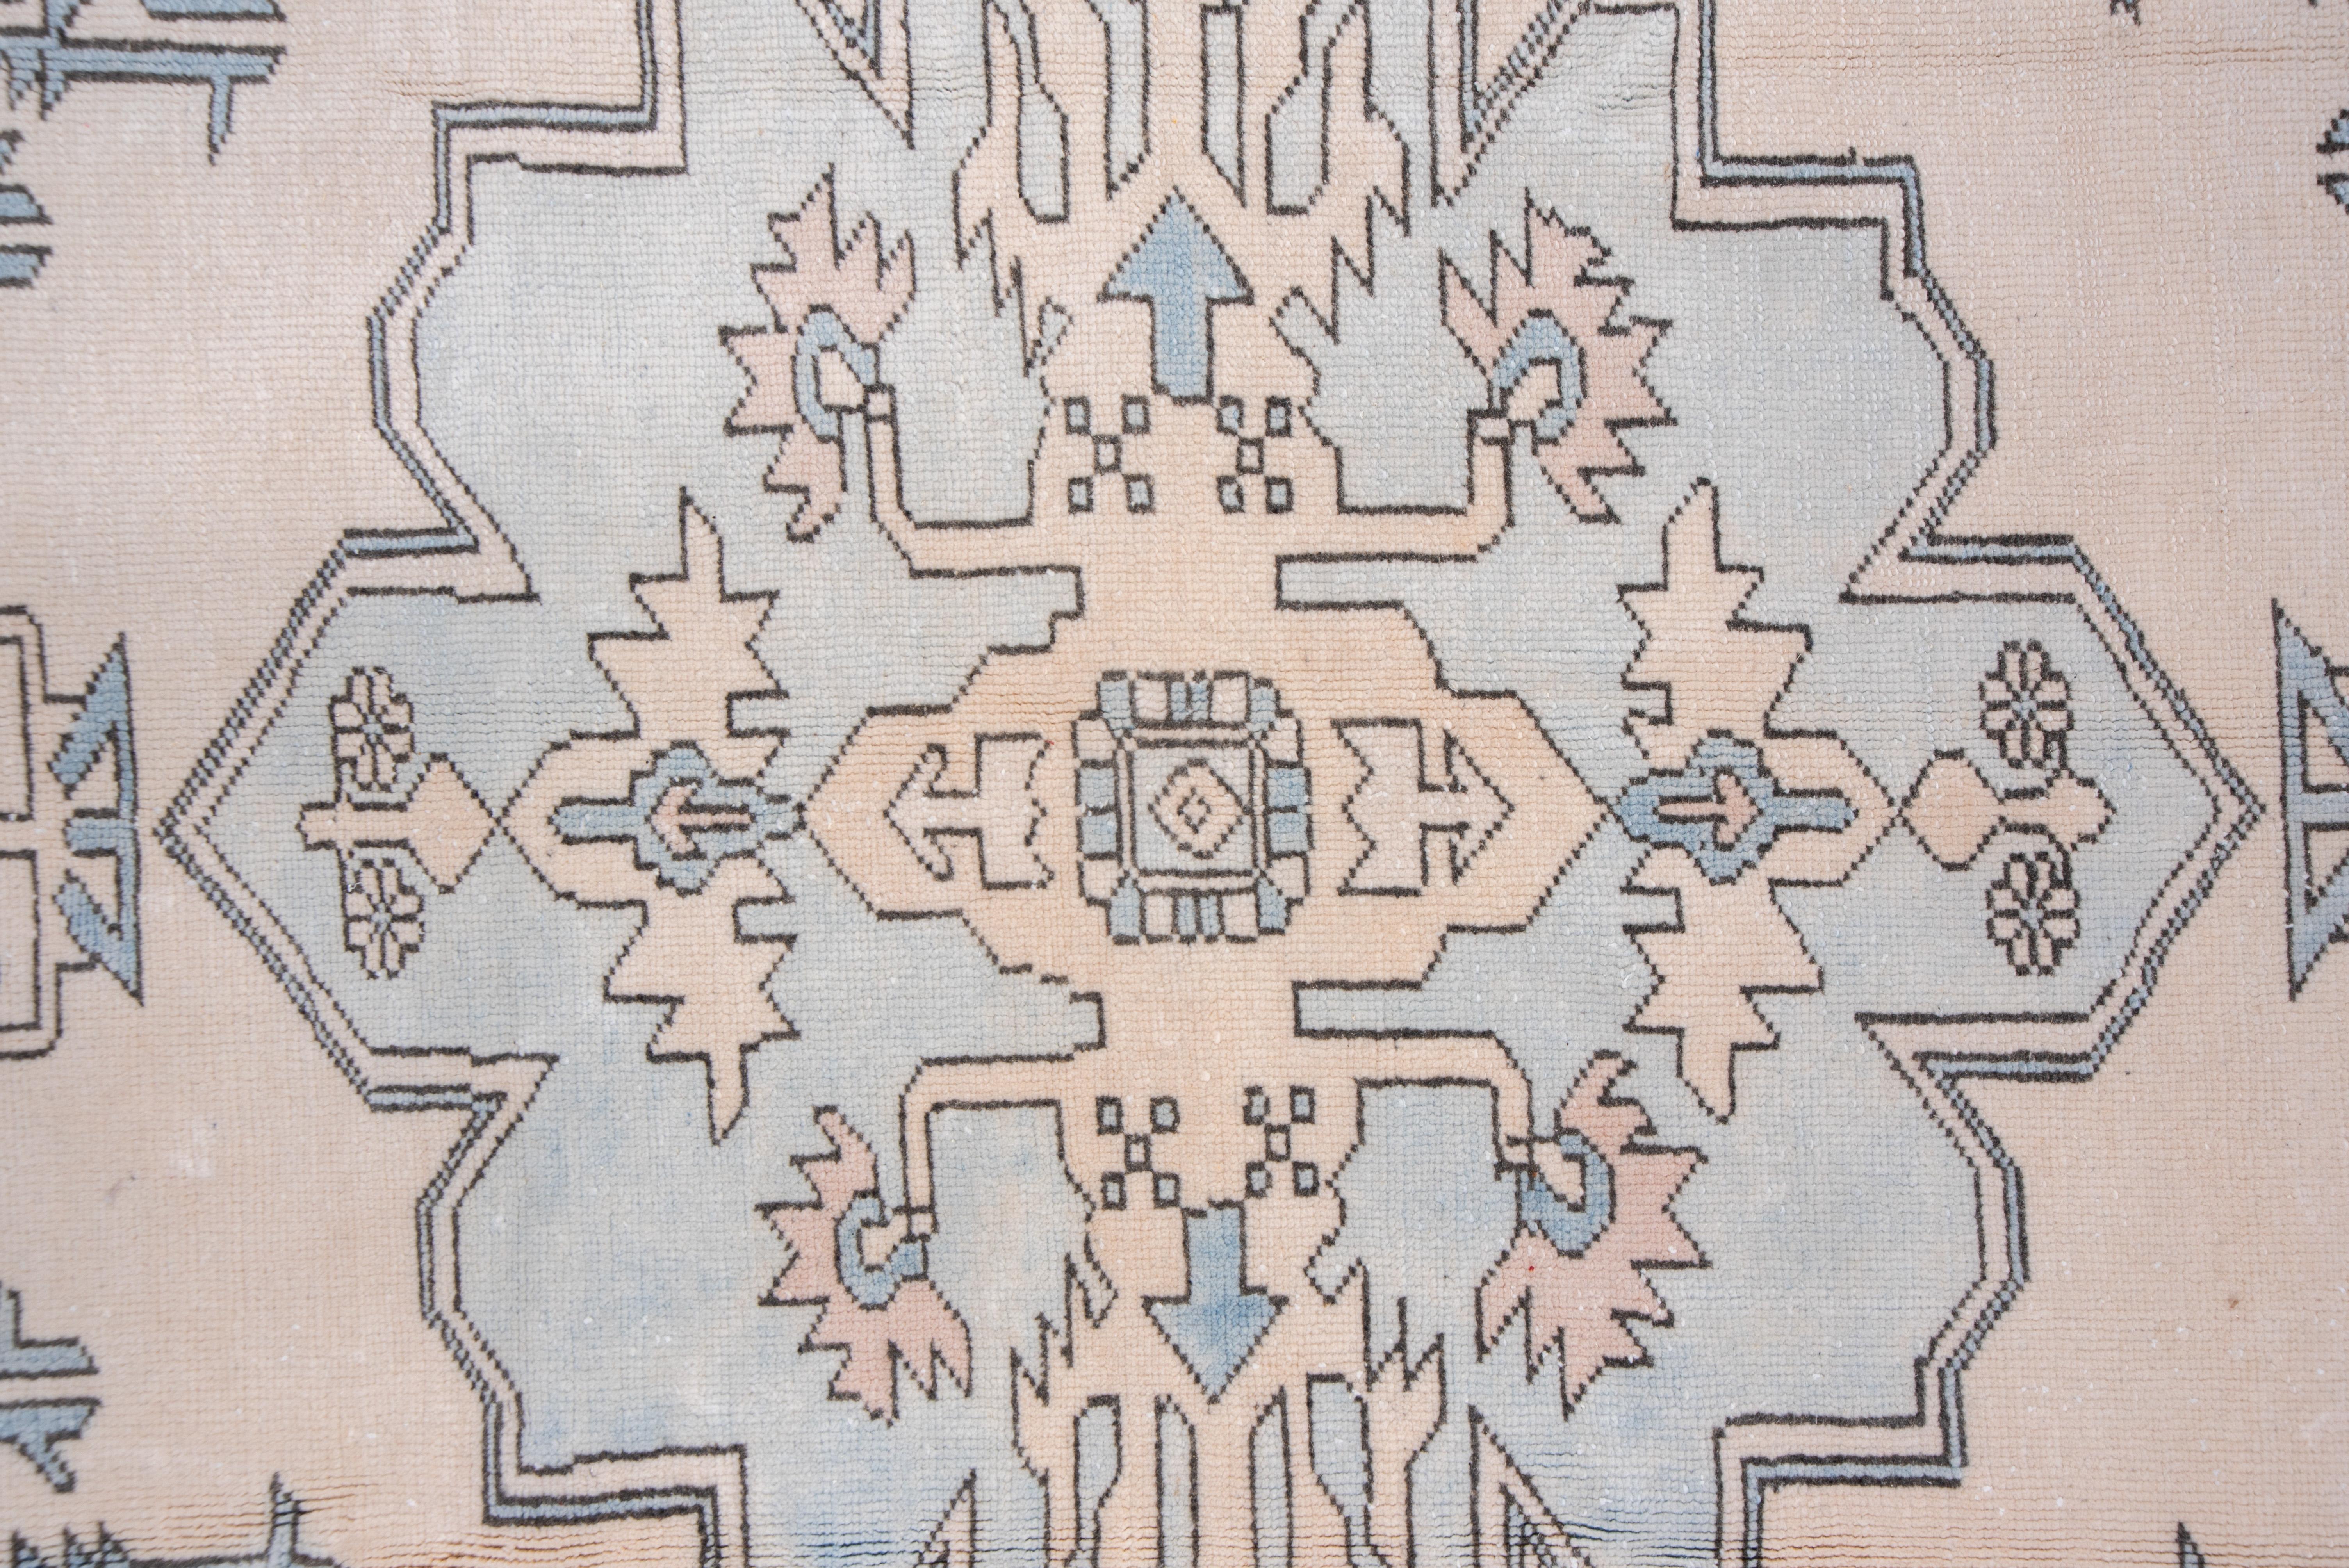 The sky blue field grounds a sandy-straw panel internally edged by hooks and flowers. It centers a palest grey irregular 12-lobe geometric medallion. The buff main border owes something to the Persian turtle pattern.